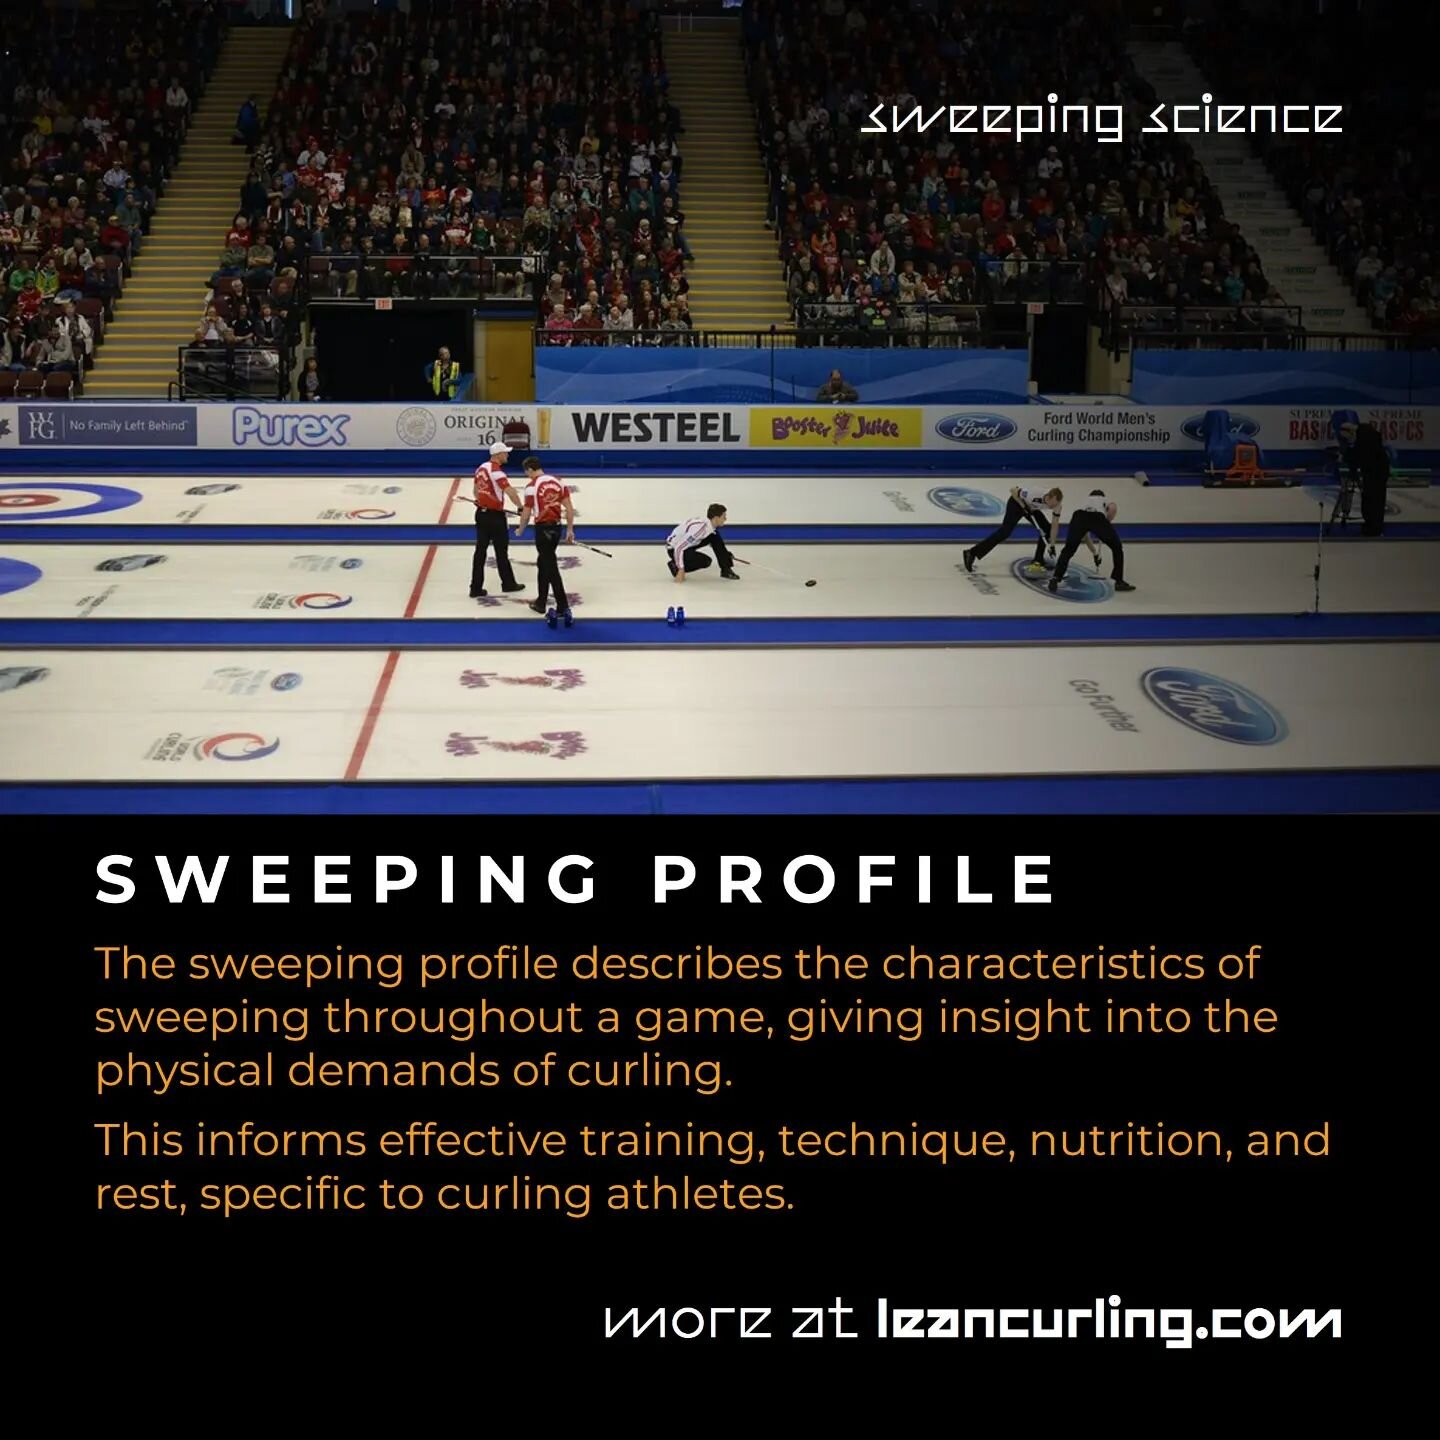 📊 The sweeping profile describes sweeping characteristics over a curling game in terms of:
&bull; Sweeping volume
&bull; Sweeping intensity
&bull; Rest

💡 Understanding this can inform preparation for curling games, events, and seasons through:
&bu